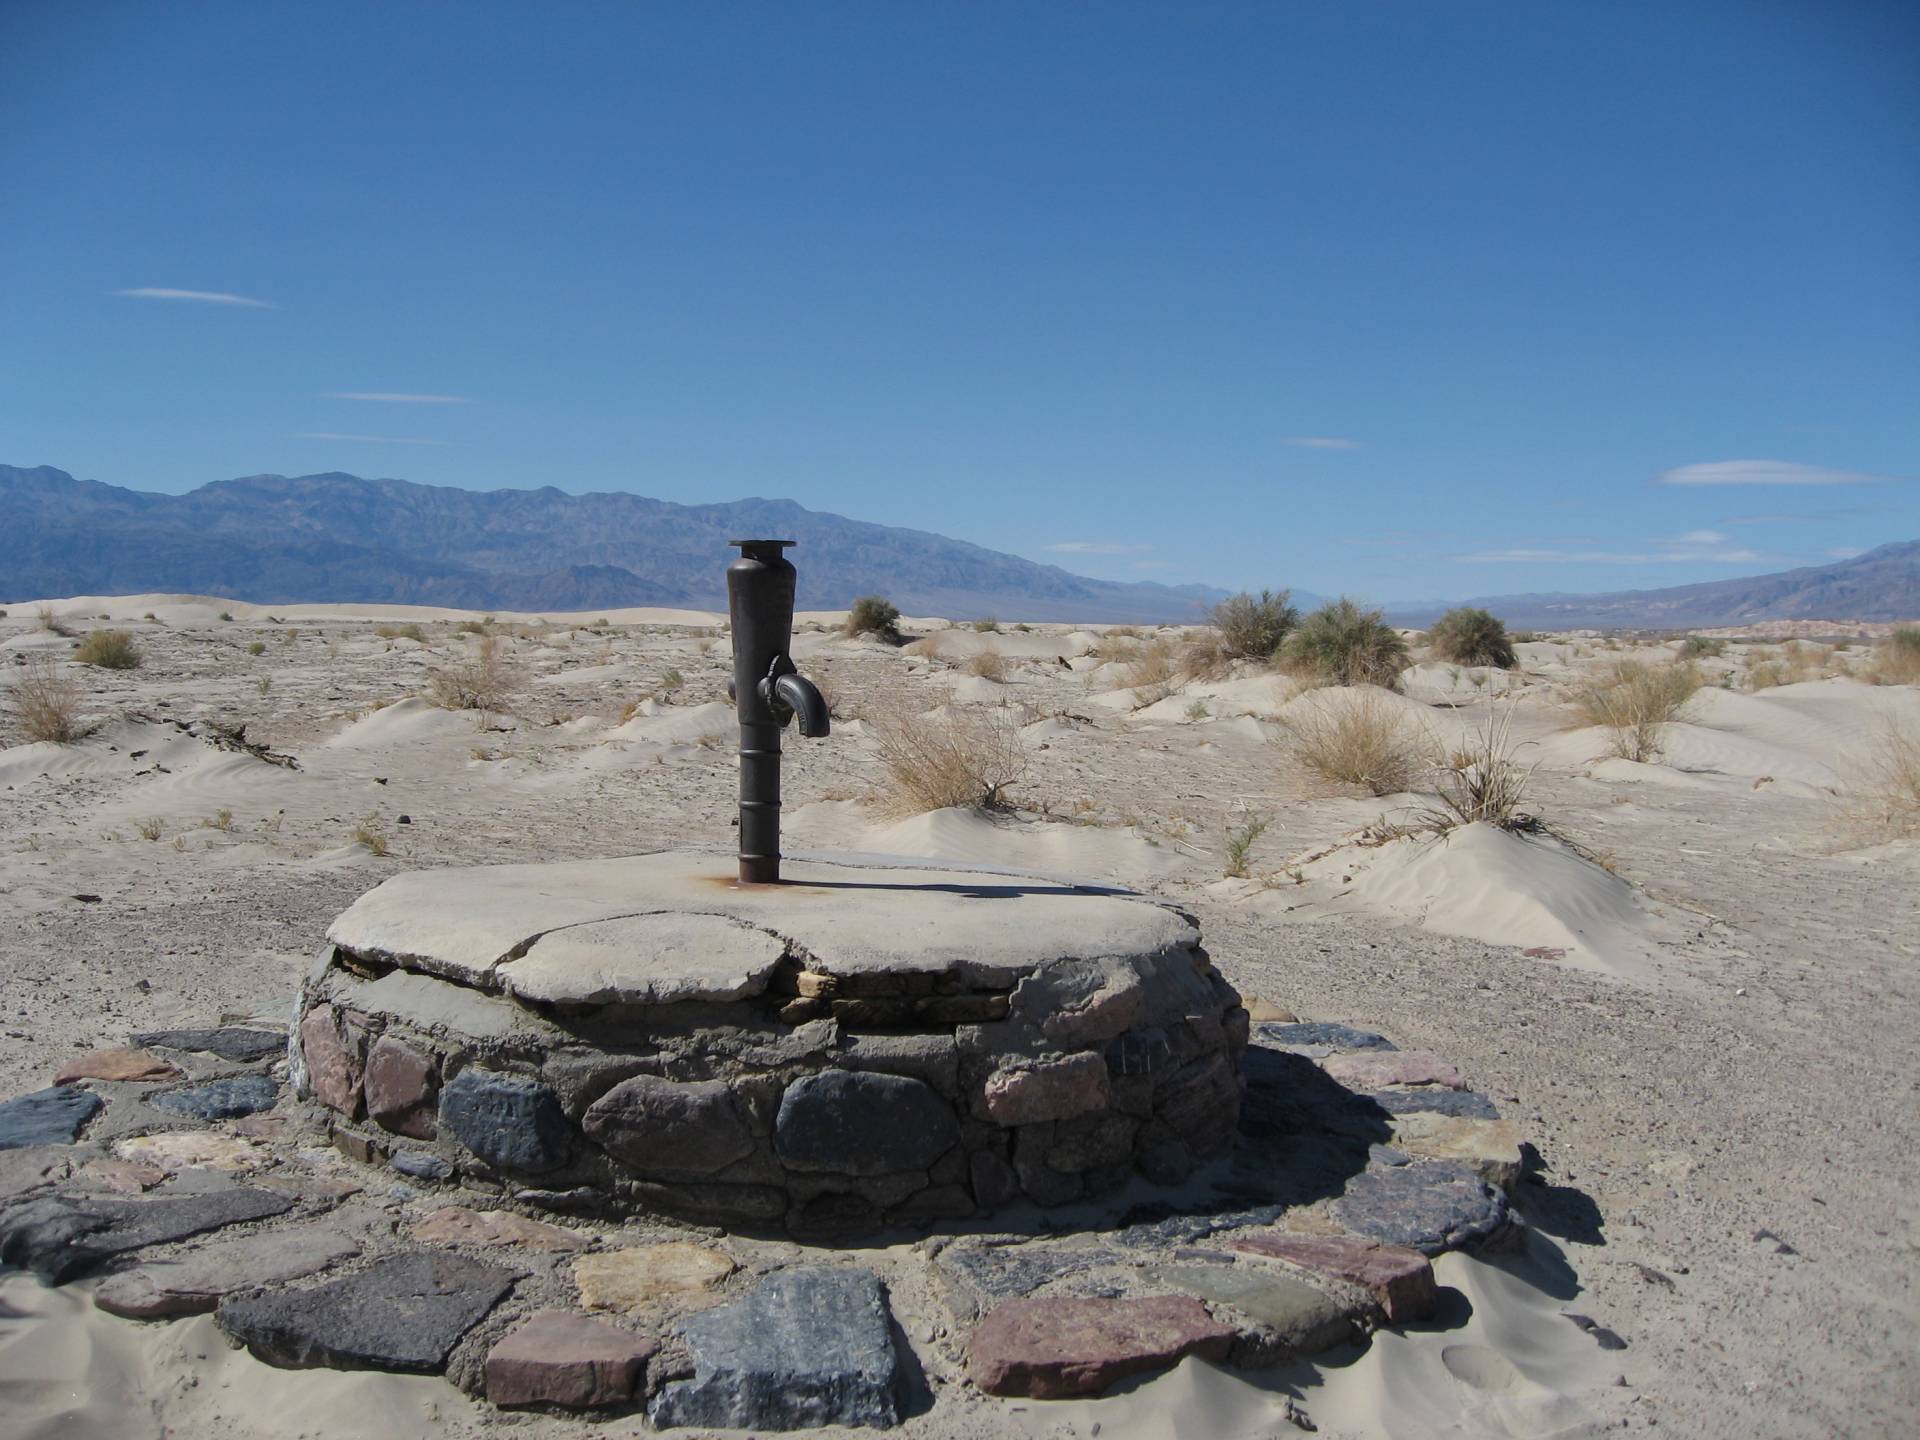 Historic Stovepipe Well, Death Valley National Park, California